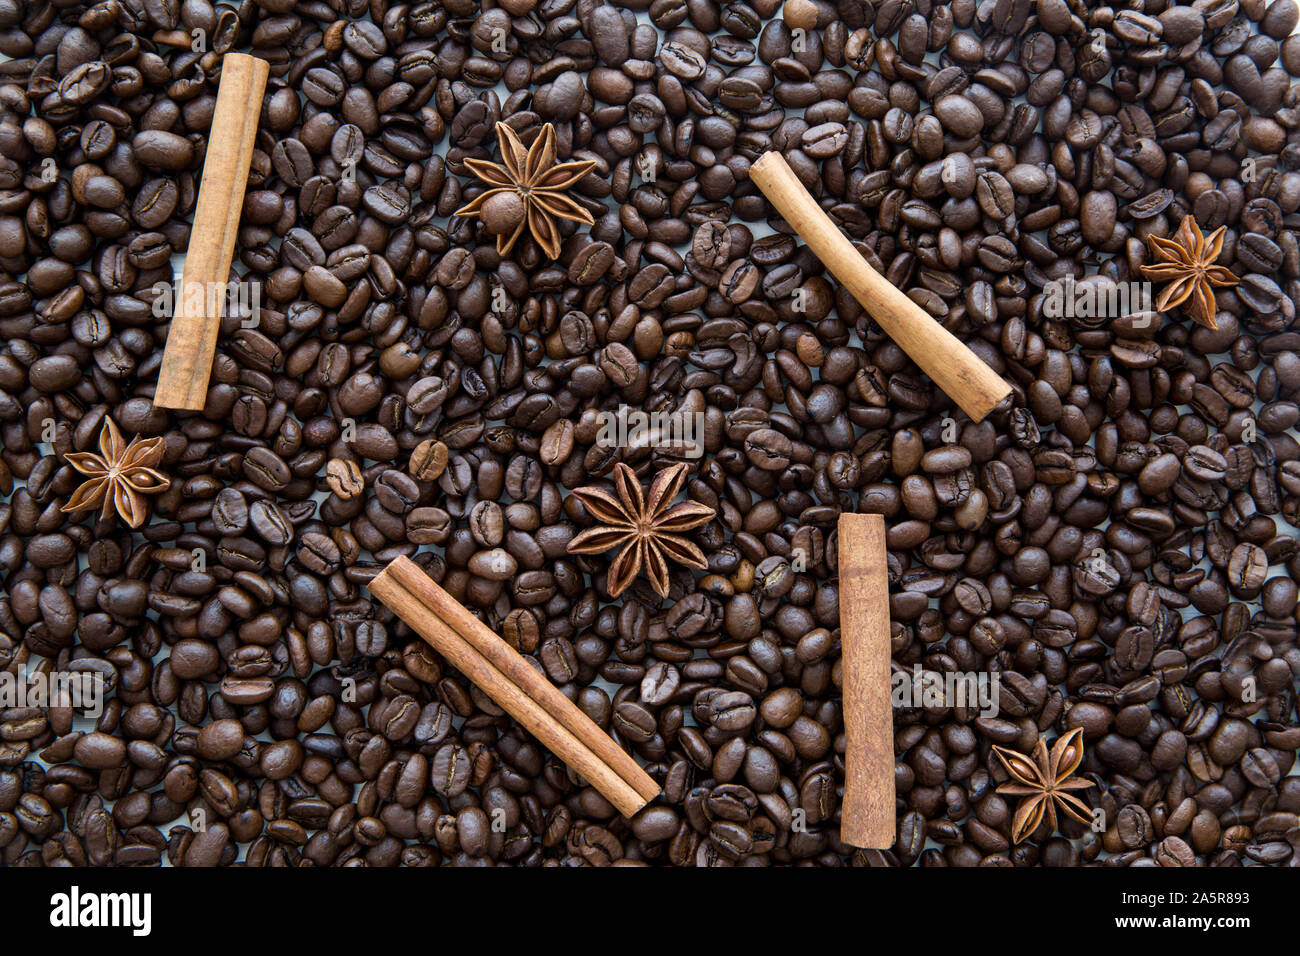 Cinnamon sticks and anise stars spices on roasted coffee beans background. Stock Photo